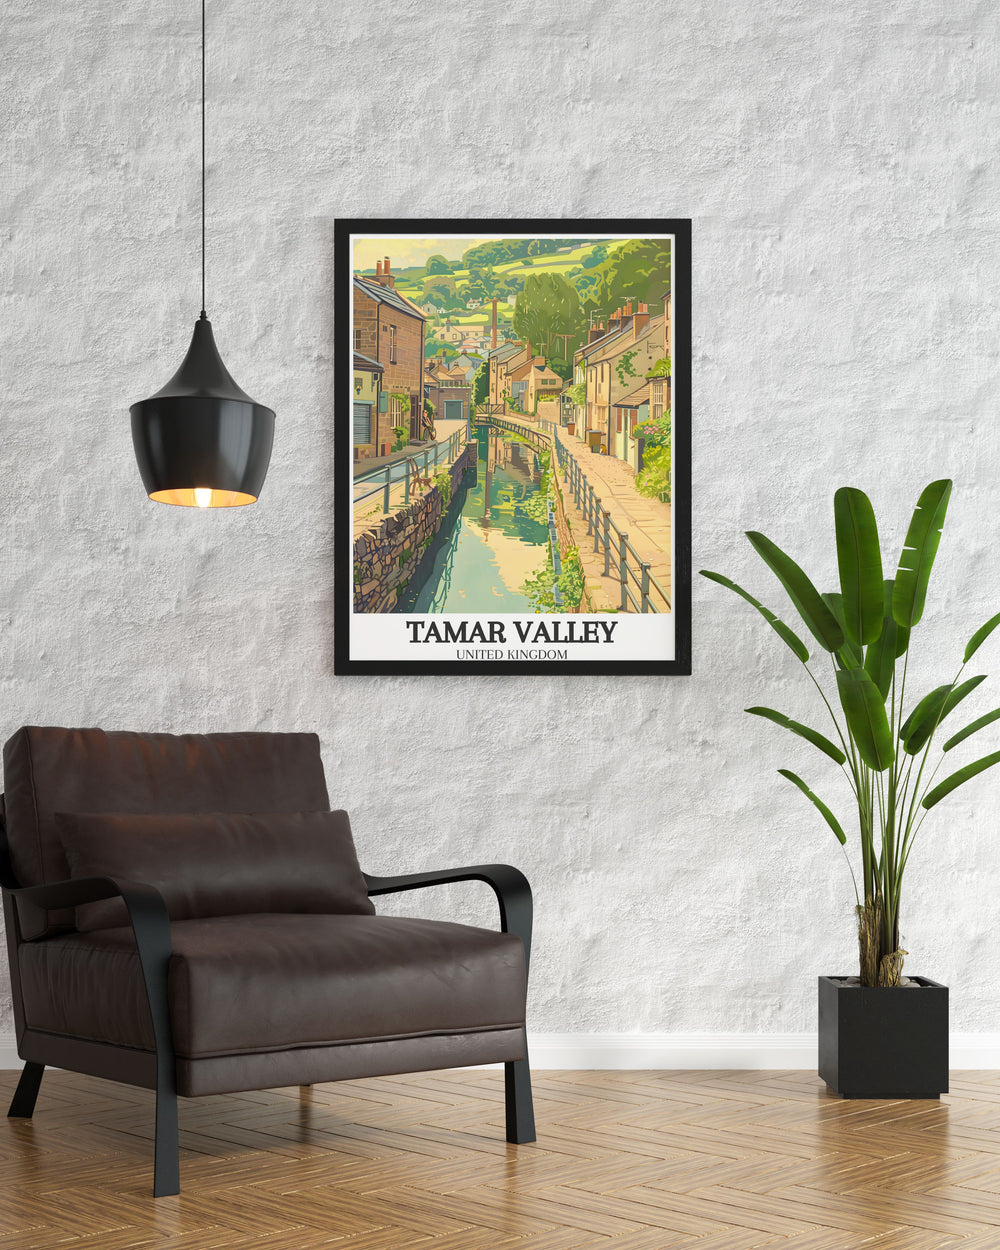 Enhance your home with the beautiful Tavistock Canal River Tamar framed print. This artwork captures the picturesque landscapes of Cornwall and Devon, making it a captivating addition to any living room or office space.